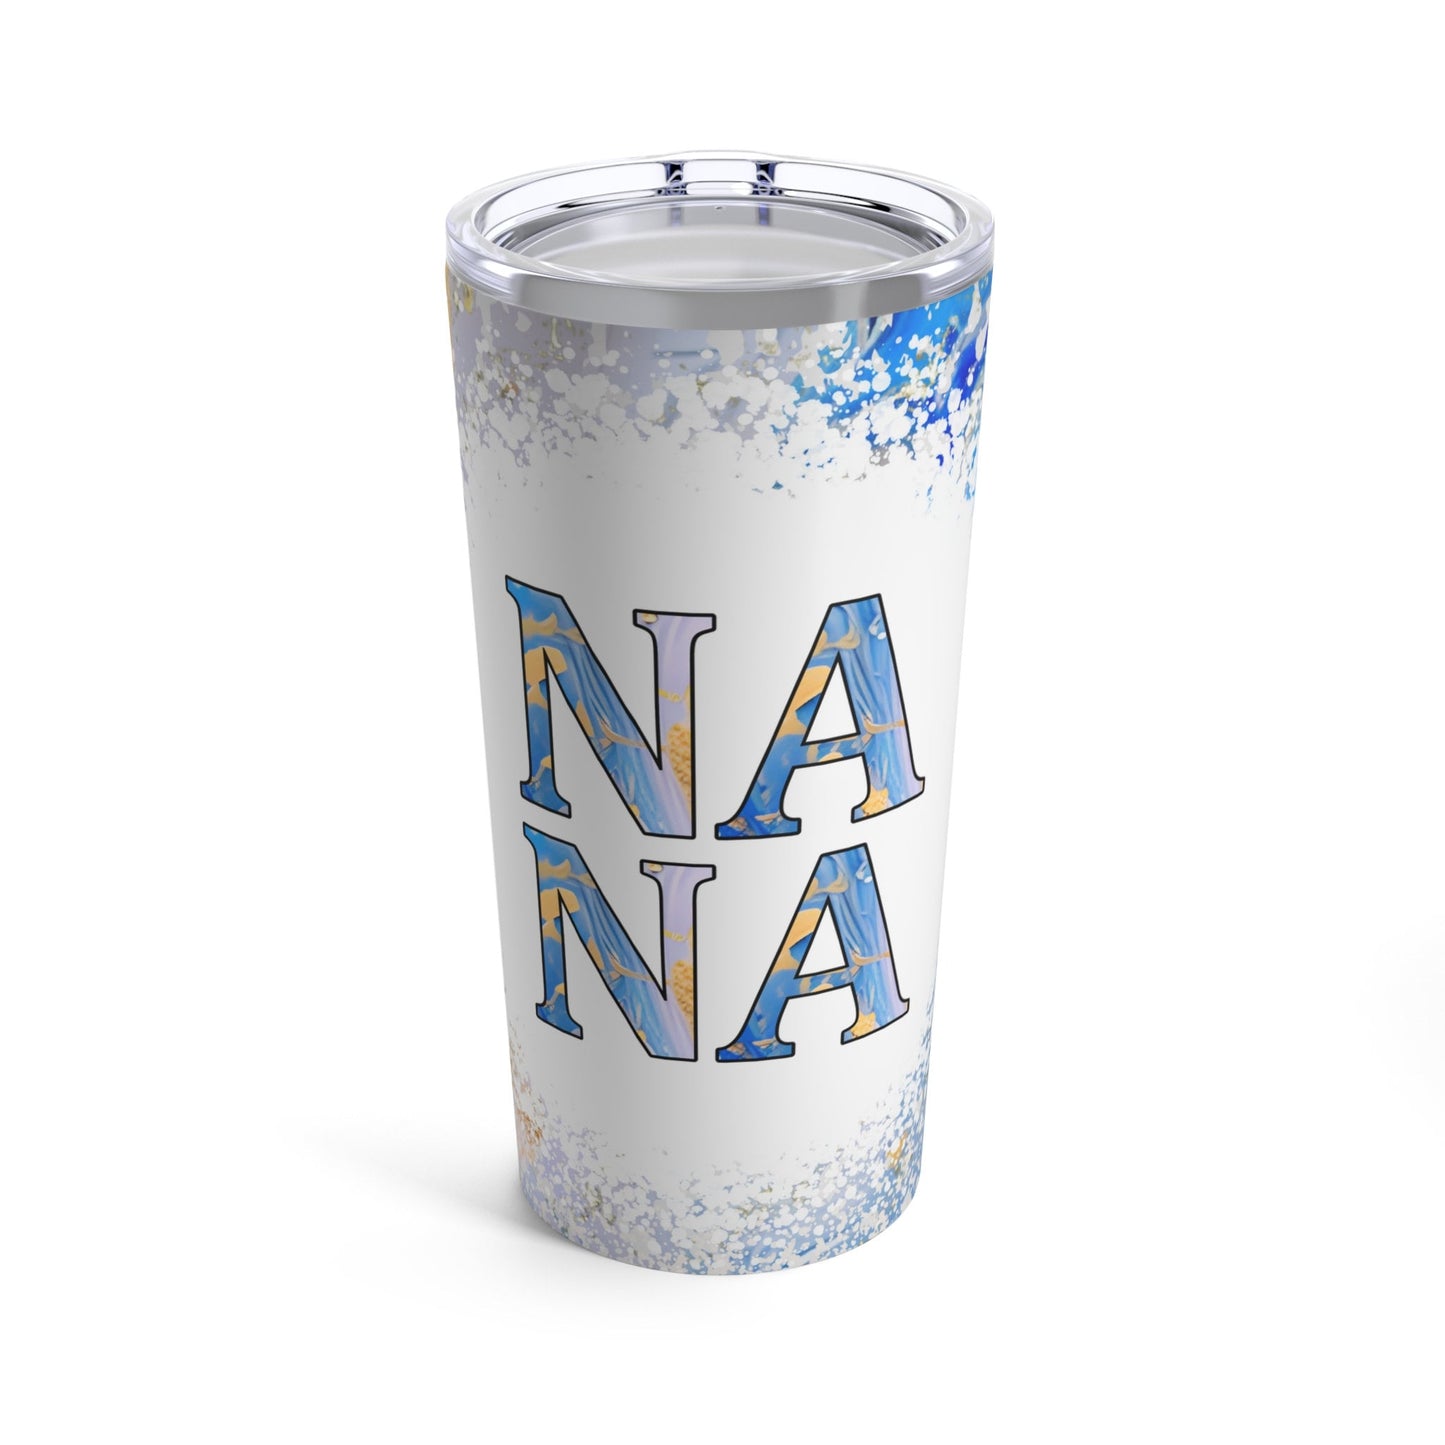 Reusable Nana Tumbler with marble design, Mother's Day Gift Skinny Steel Tumbler with lid, eco friendly tumbler, 20 oz iced coffee tumbler